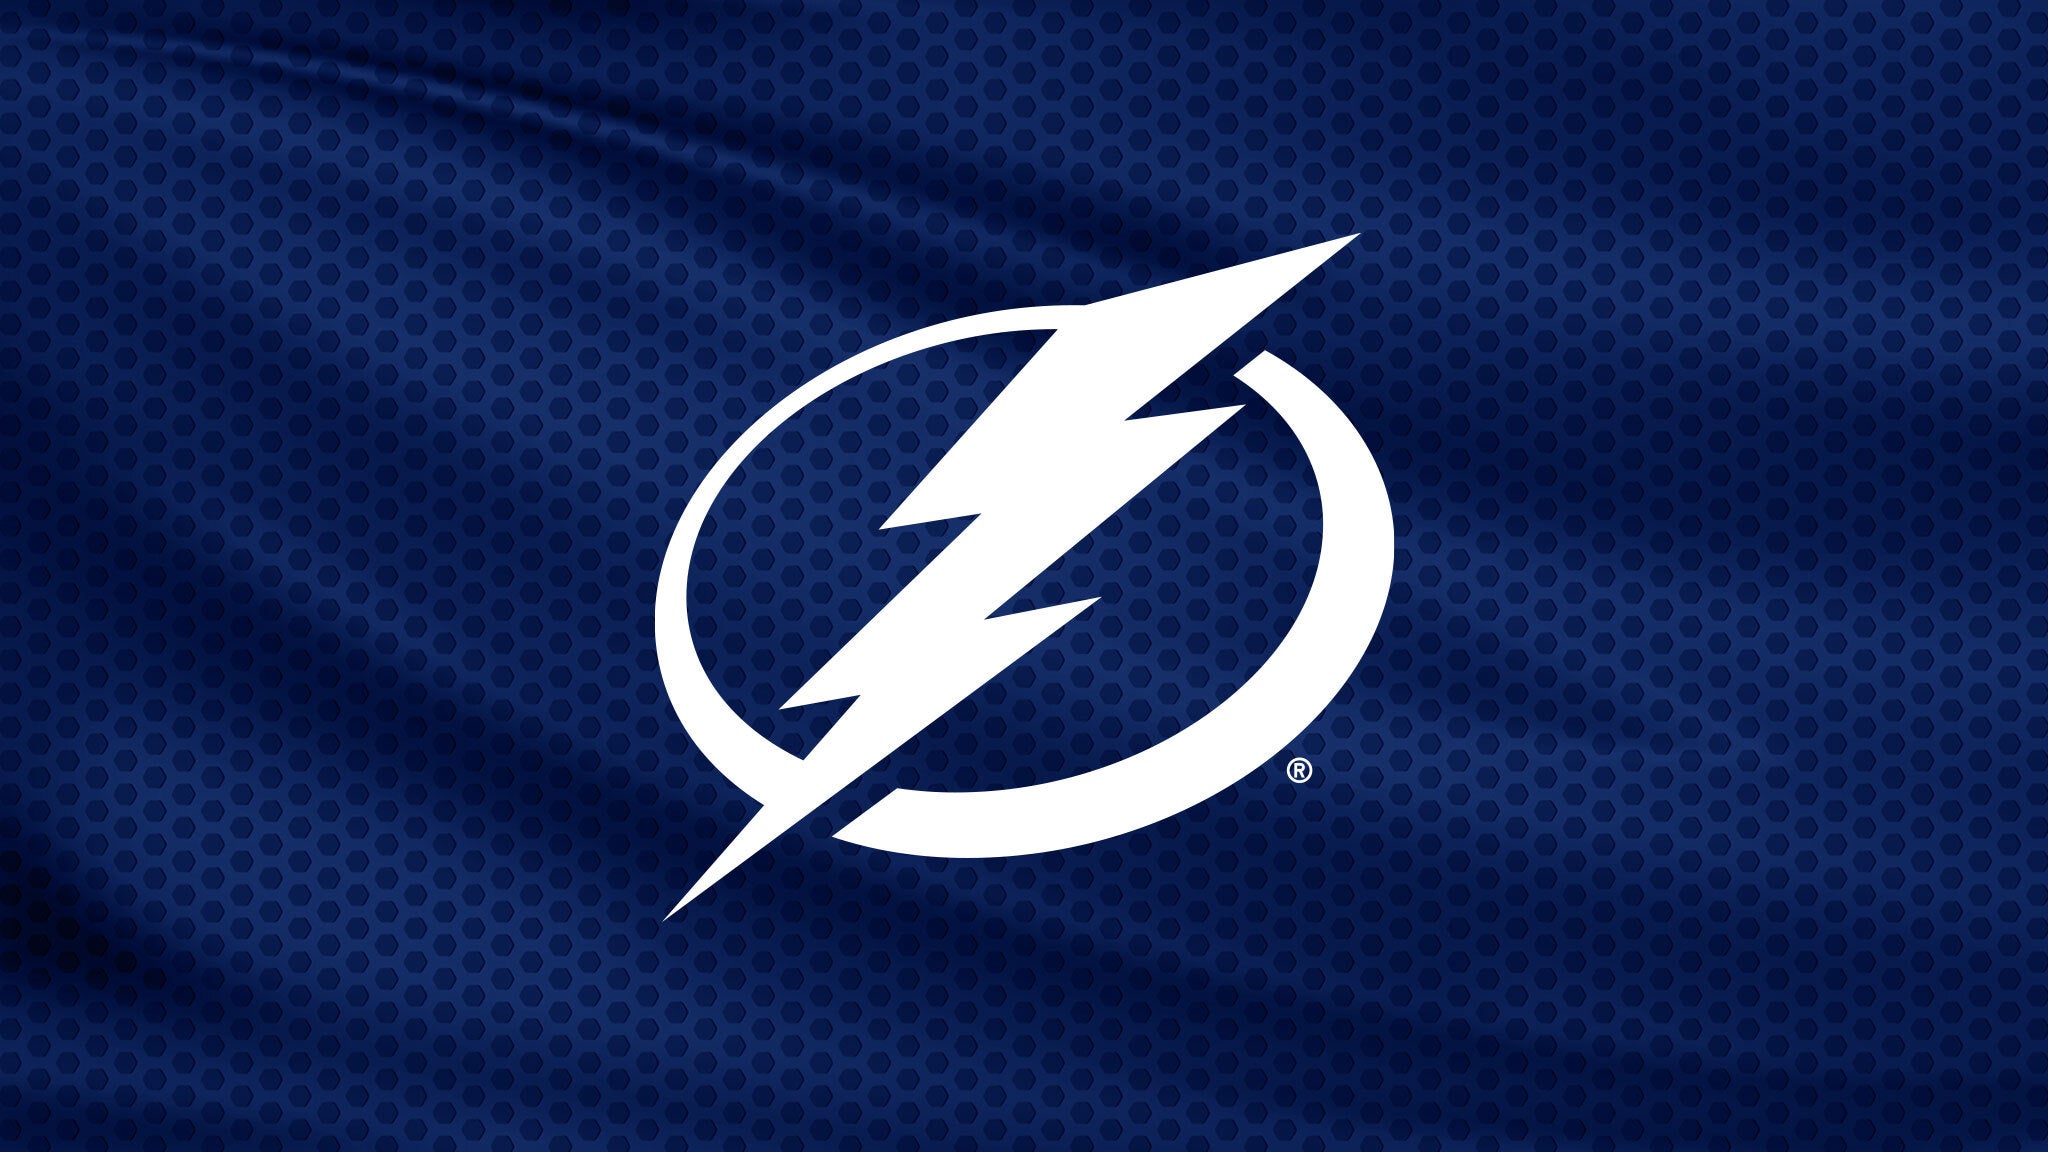 NHL Playoffs First Round: Lightning v Panthers Home Game #2 in Tampa promo photo for Chase Card presale offer code